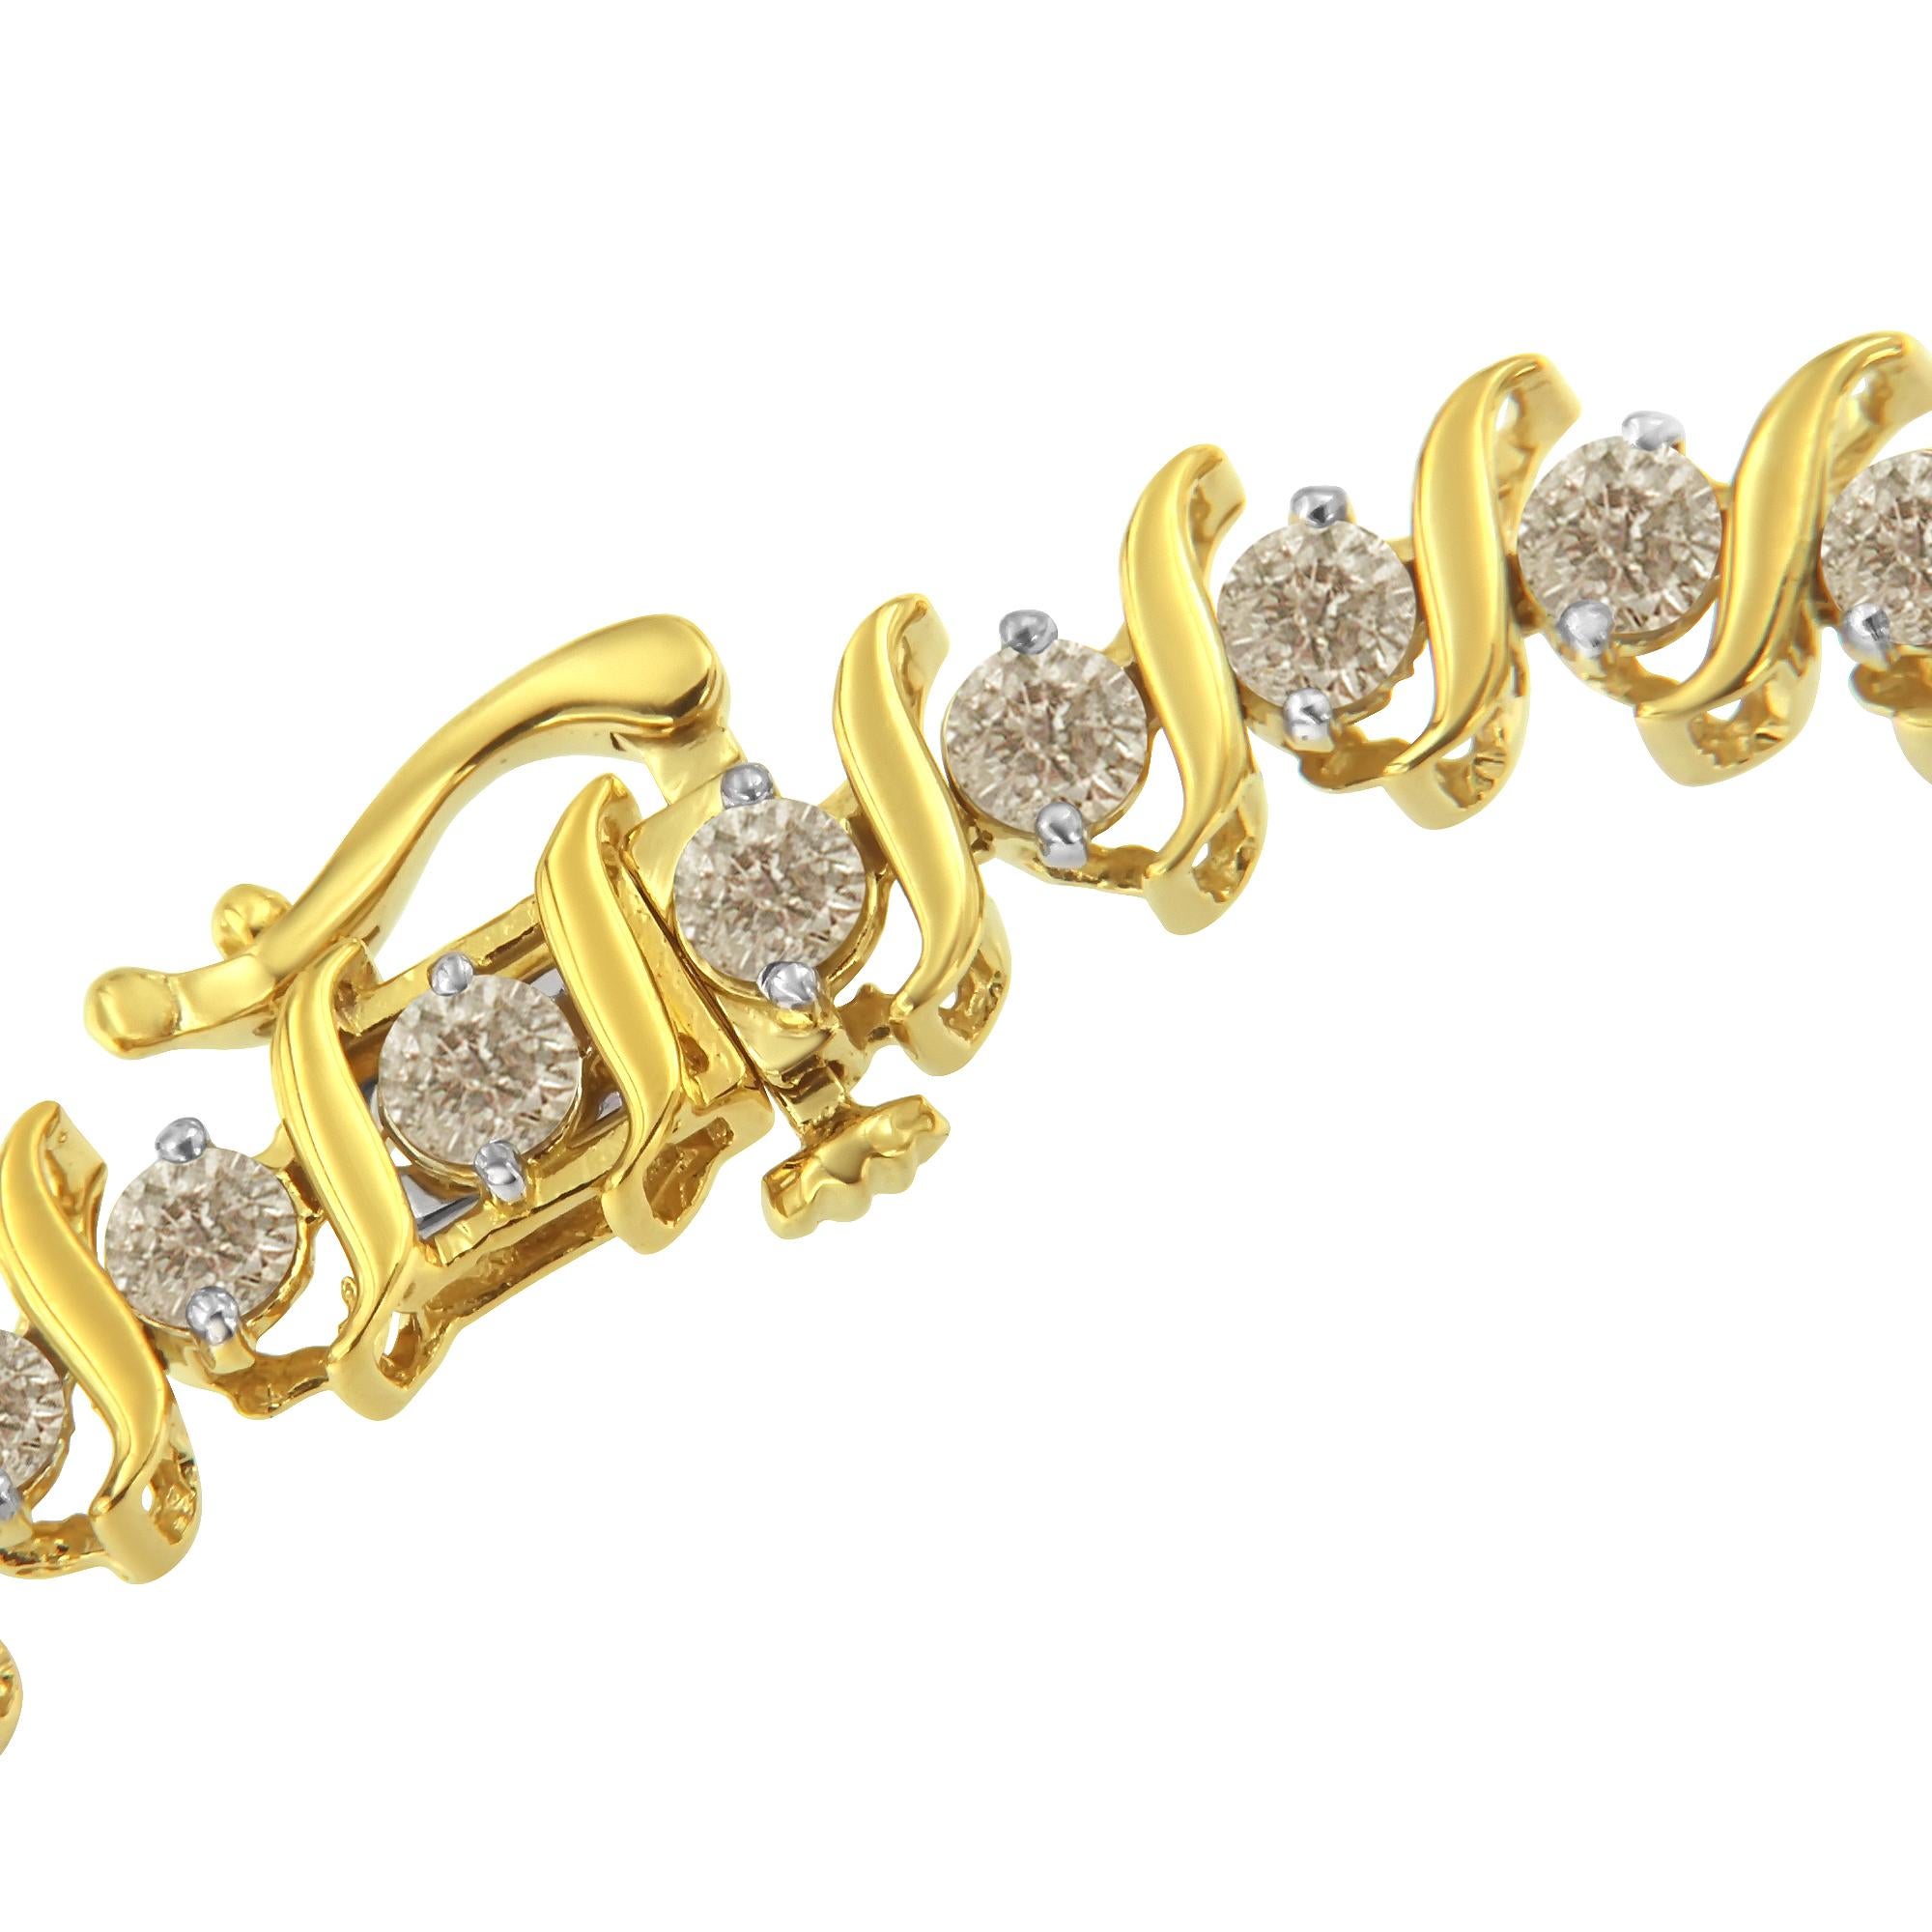 A stunning link bracelet that glistens with round diamonds set within S-shape links to add a timeless touch to this design. Crafted from 2 micron 14K Yellow gold plated .925 sterling silver, this bracelet elegantly puts the finishing touch on an